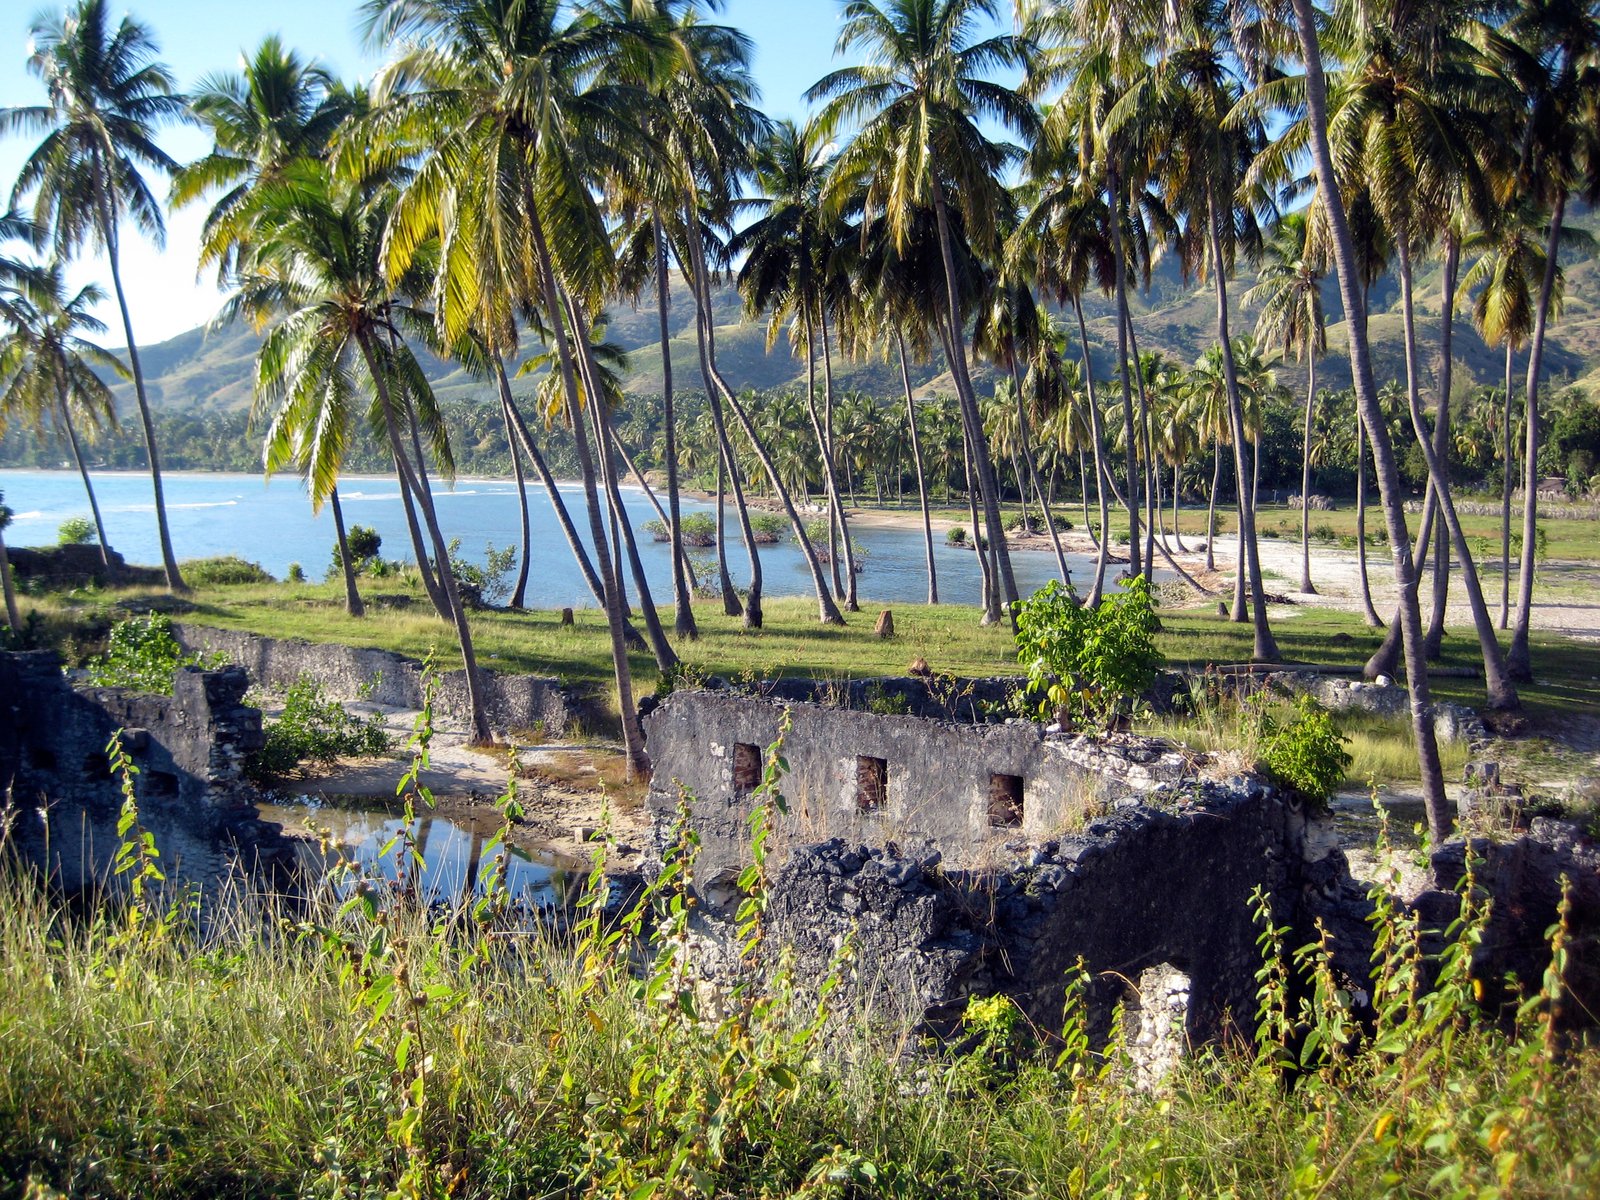 palm trees surround the ruins of an ancient village